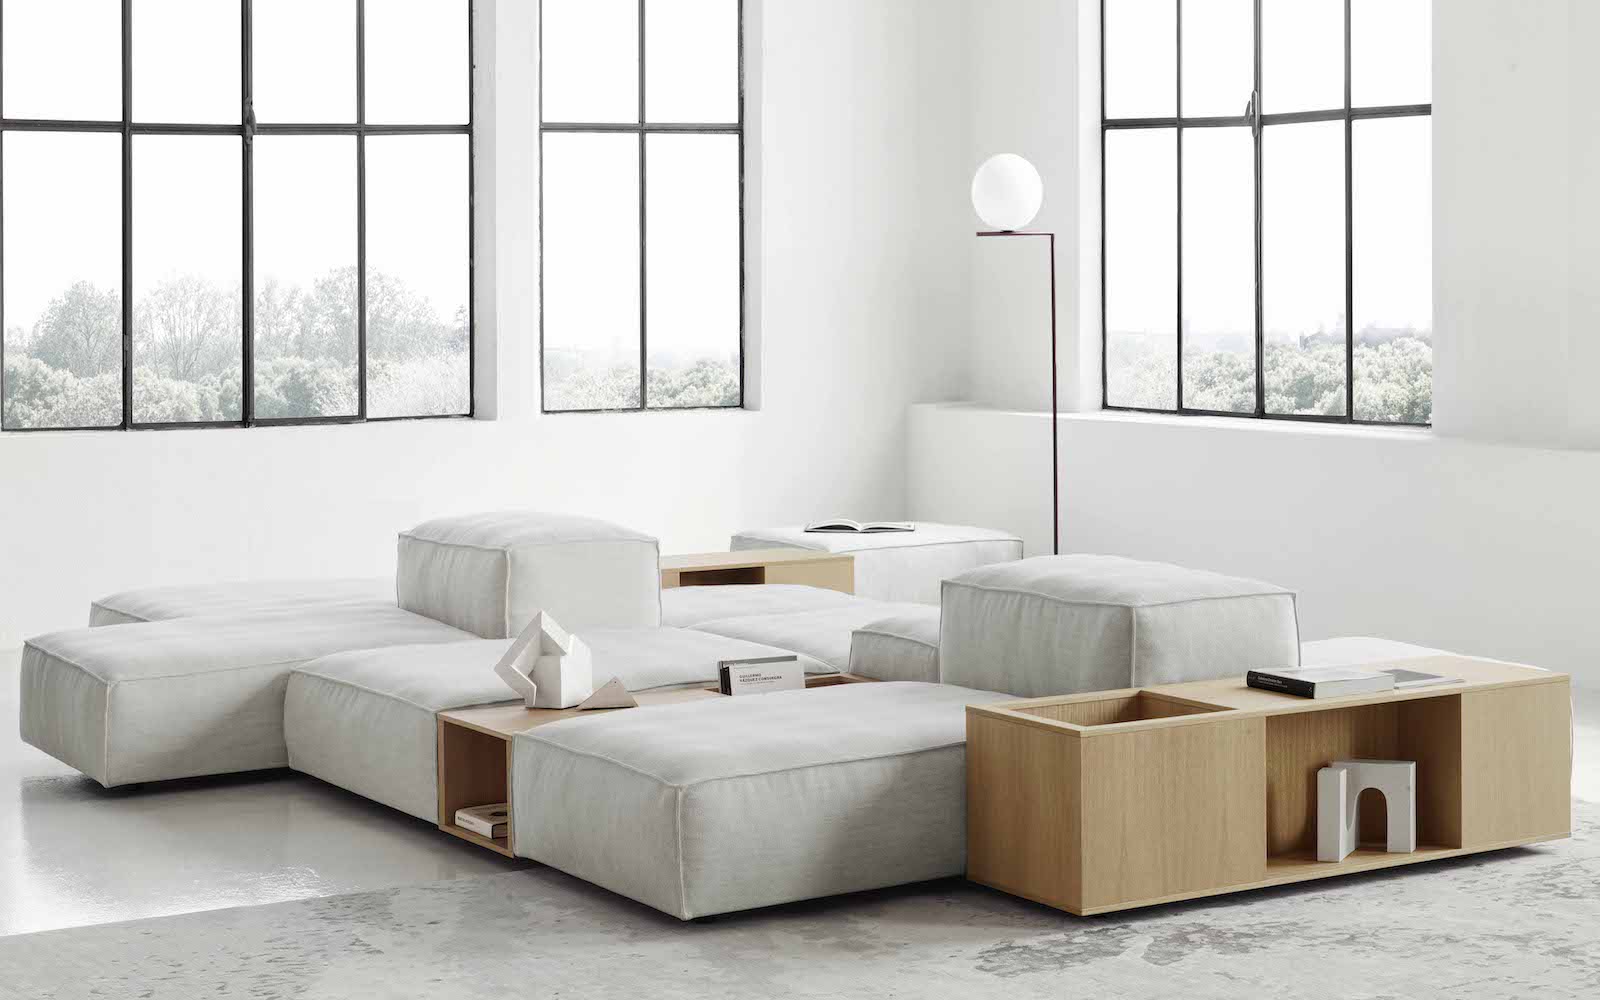 An image of a contemporary furniture set